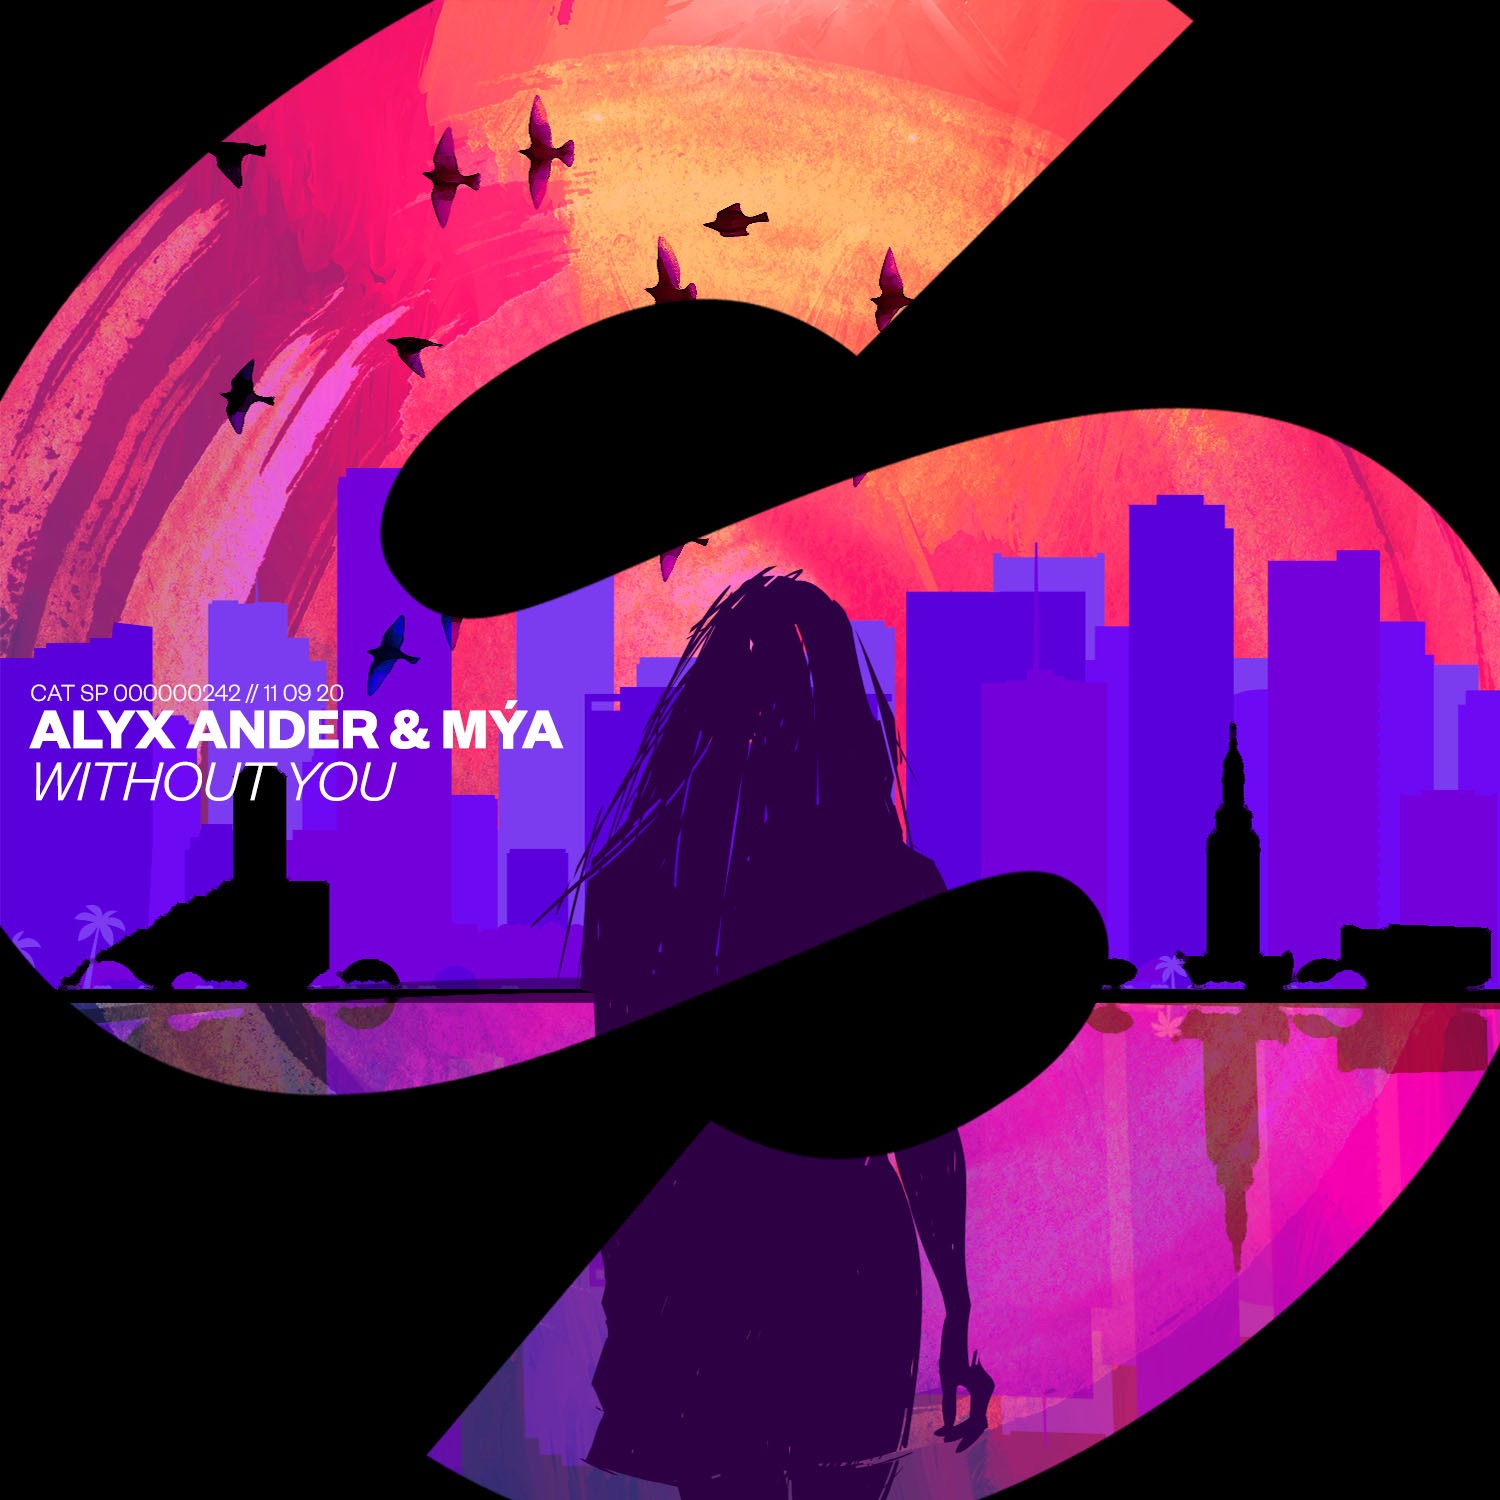 Alyx Ander & Mýa - Without You - Single